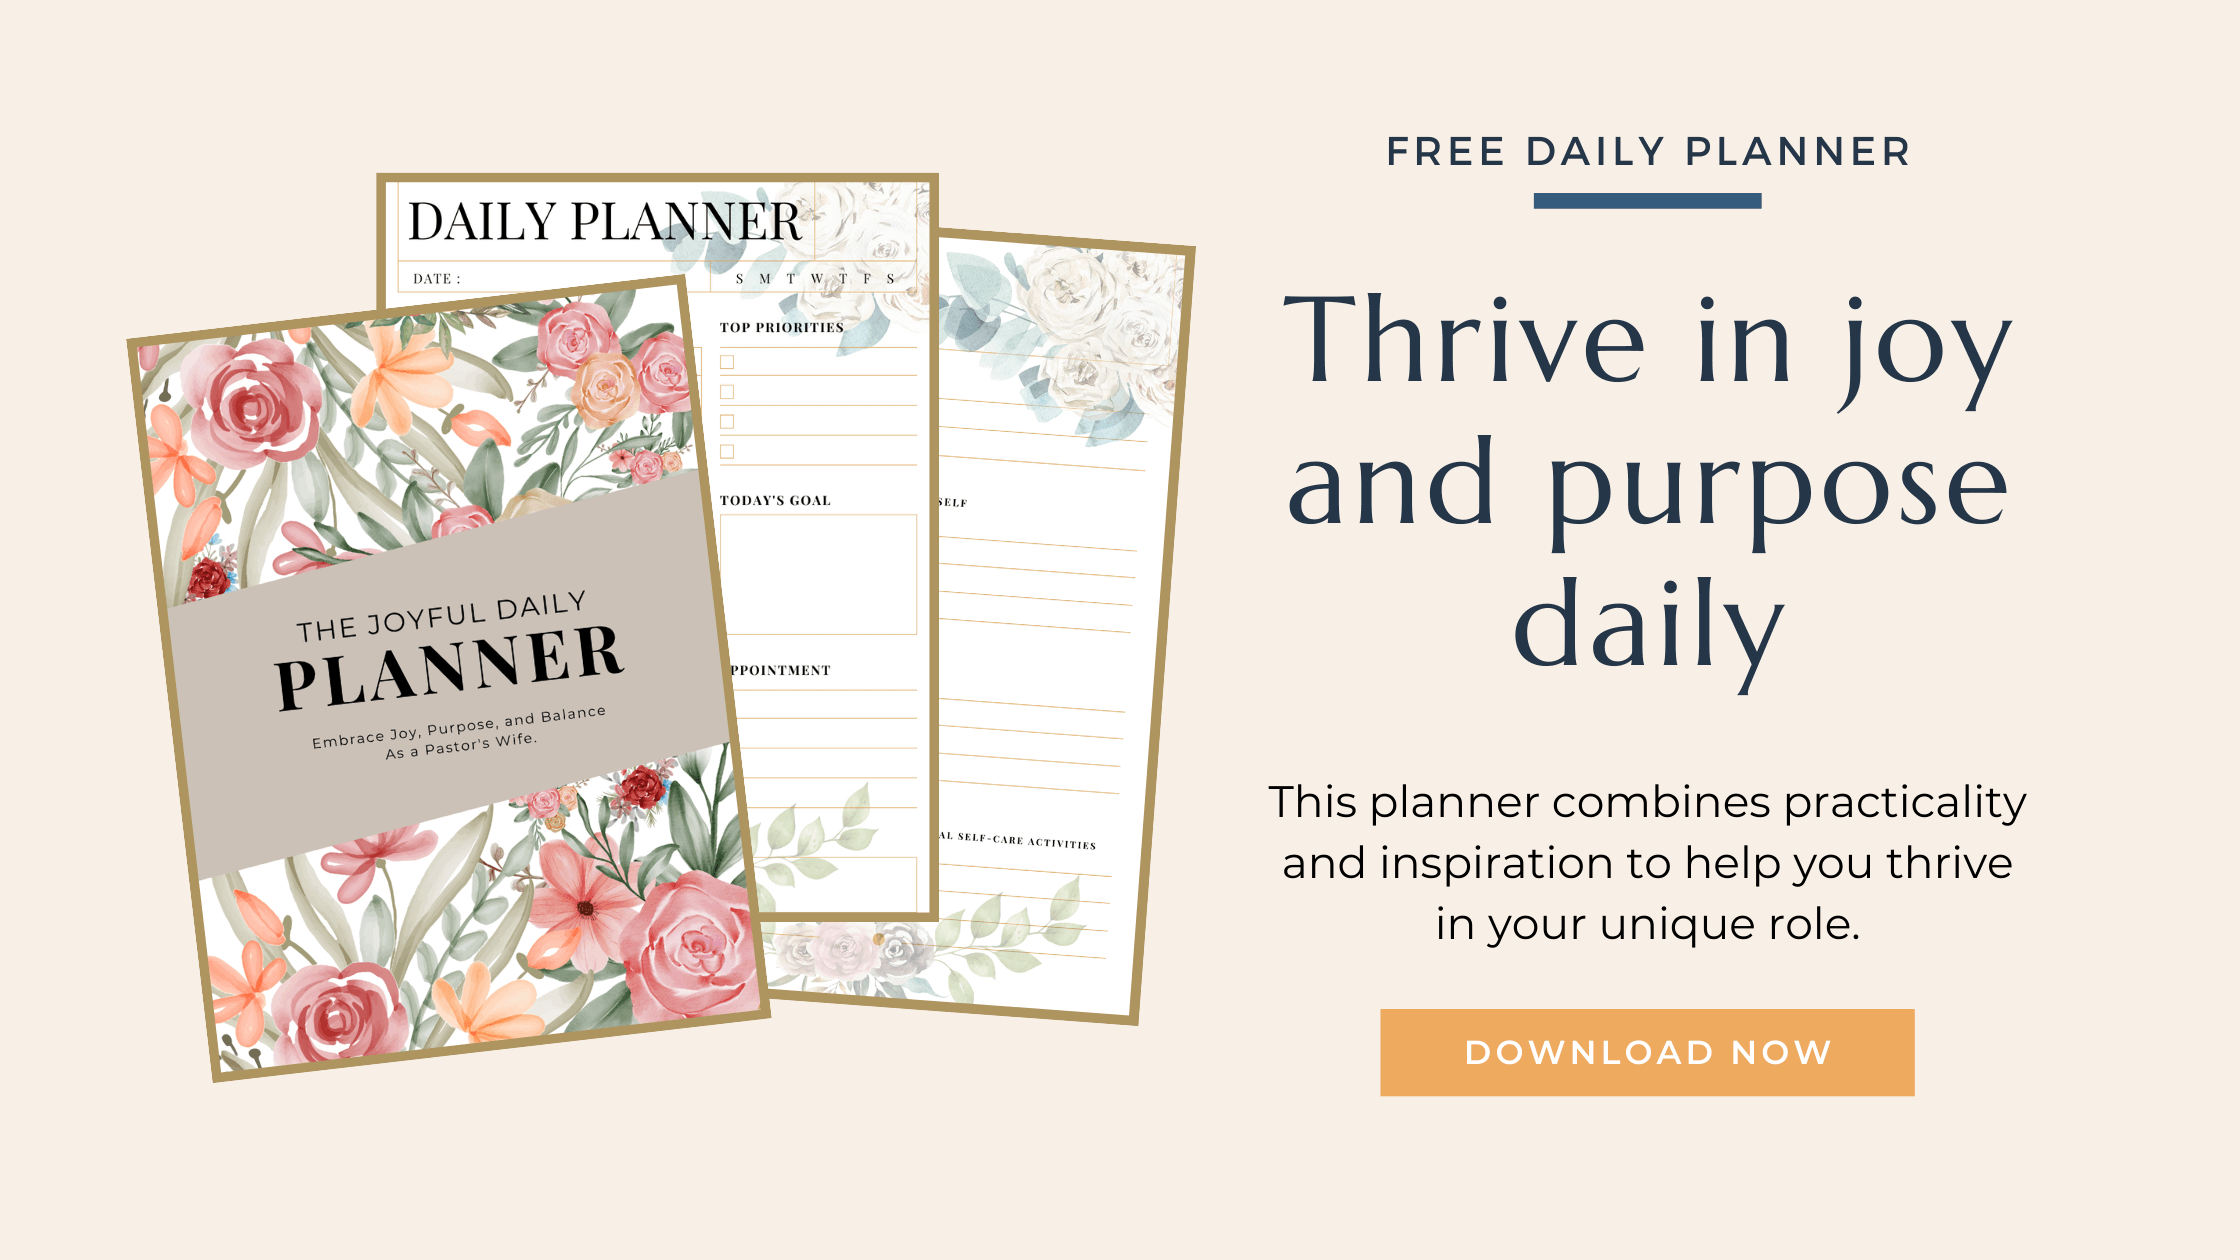 She Is A Message Joyful Daily Planner For Pastors Wives For the Blog post How To Wear The Full Armor Of God In 7 Simple Steps